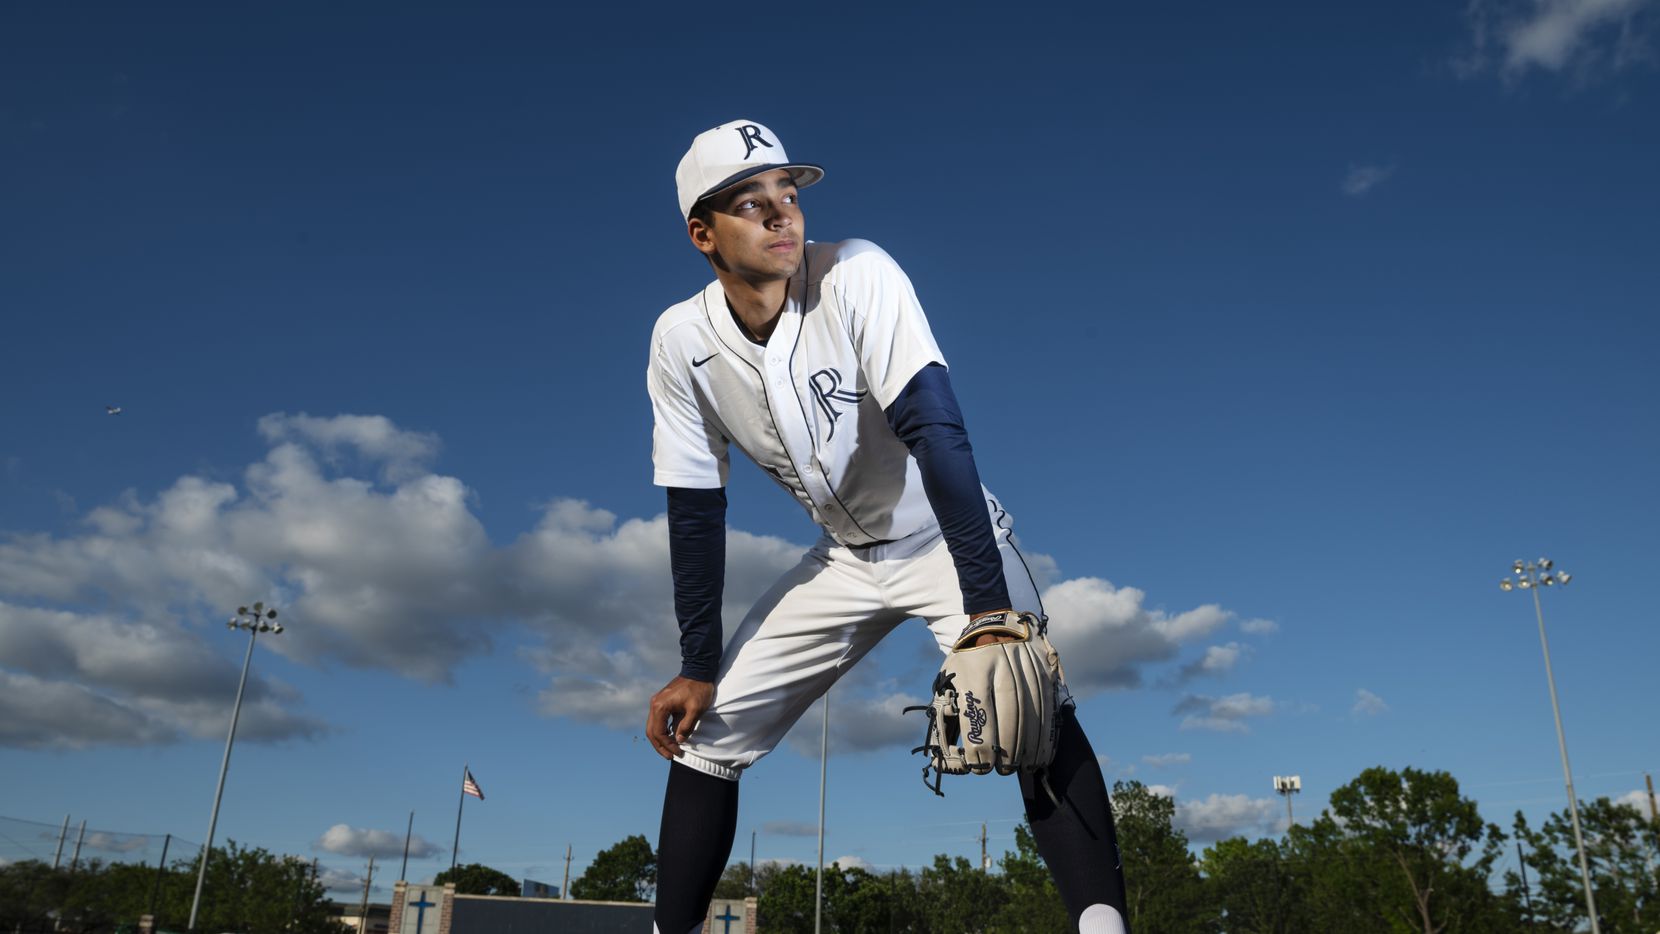 Jesuit's Jordan Lawlar appears destined to be a top 5 MLB draft pick. Will  he be selected by his hometown Texas Rangers?